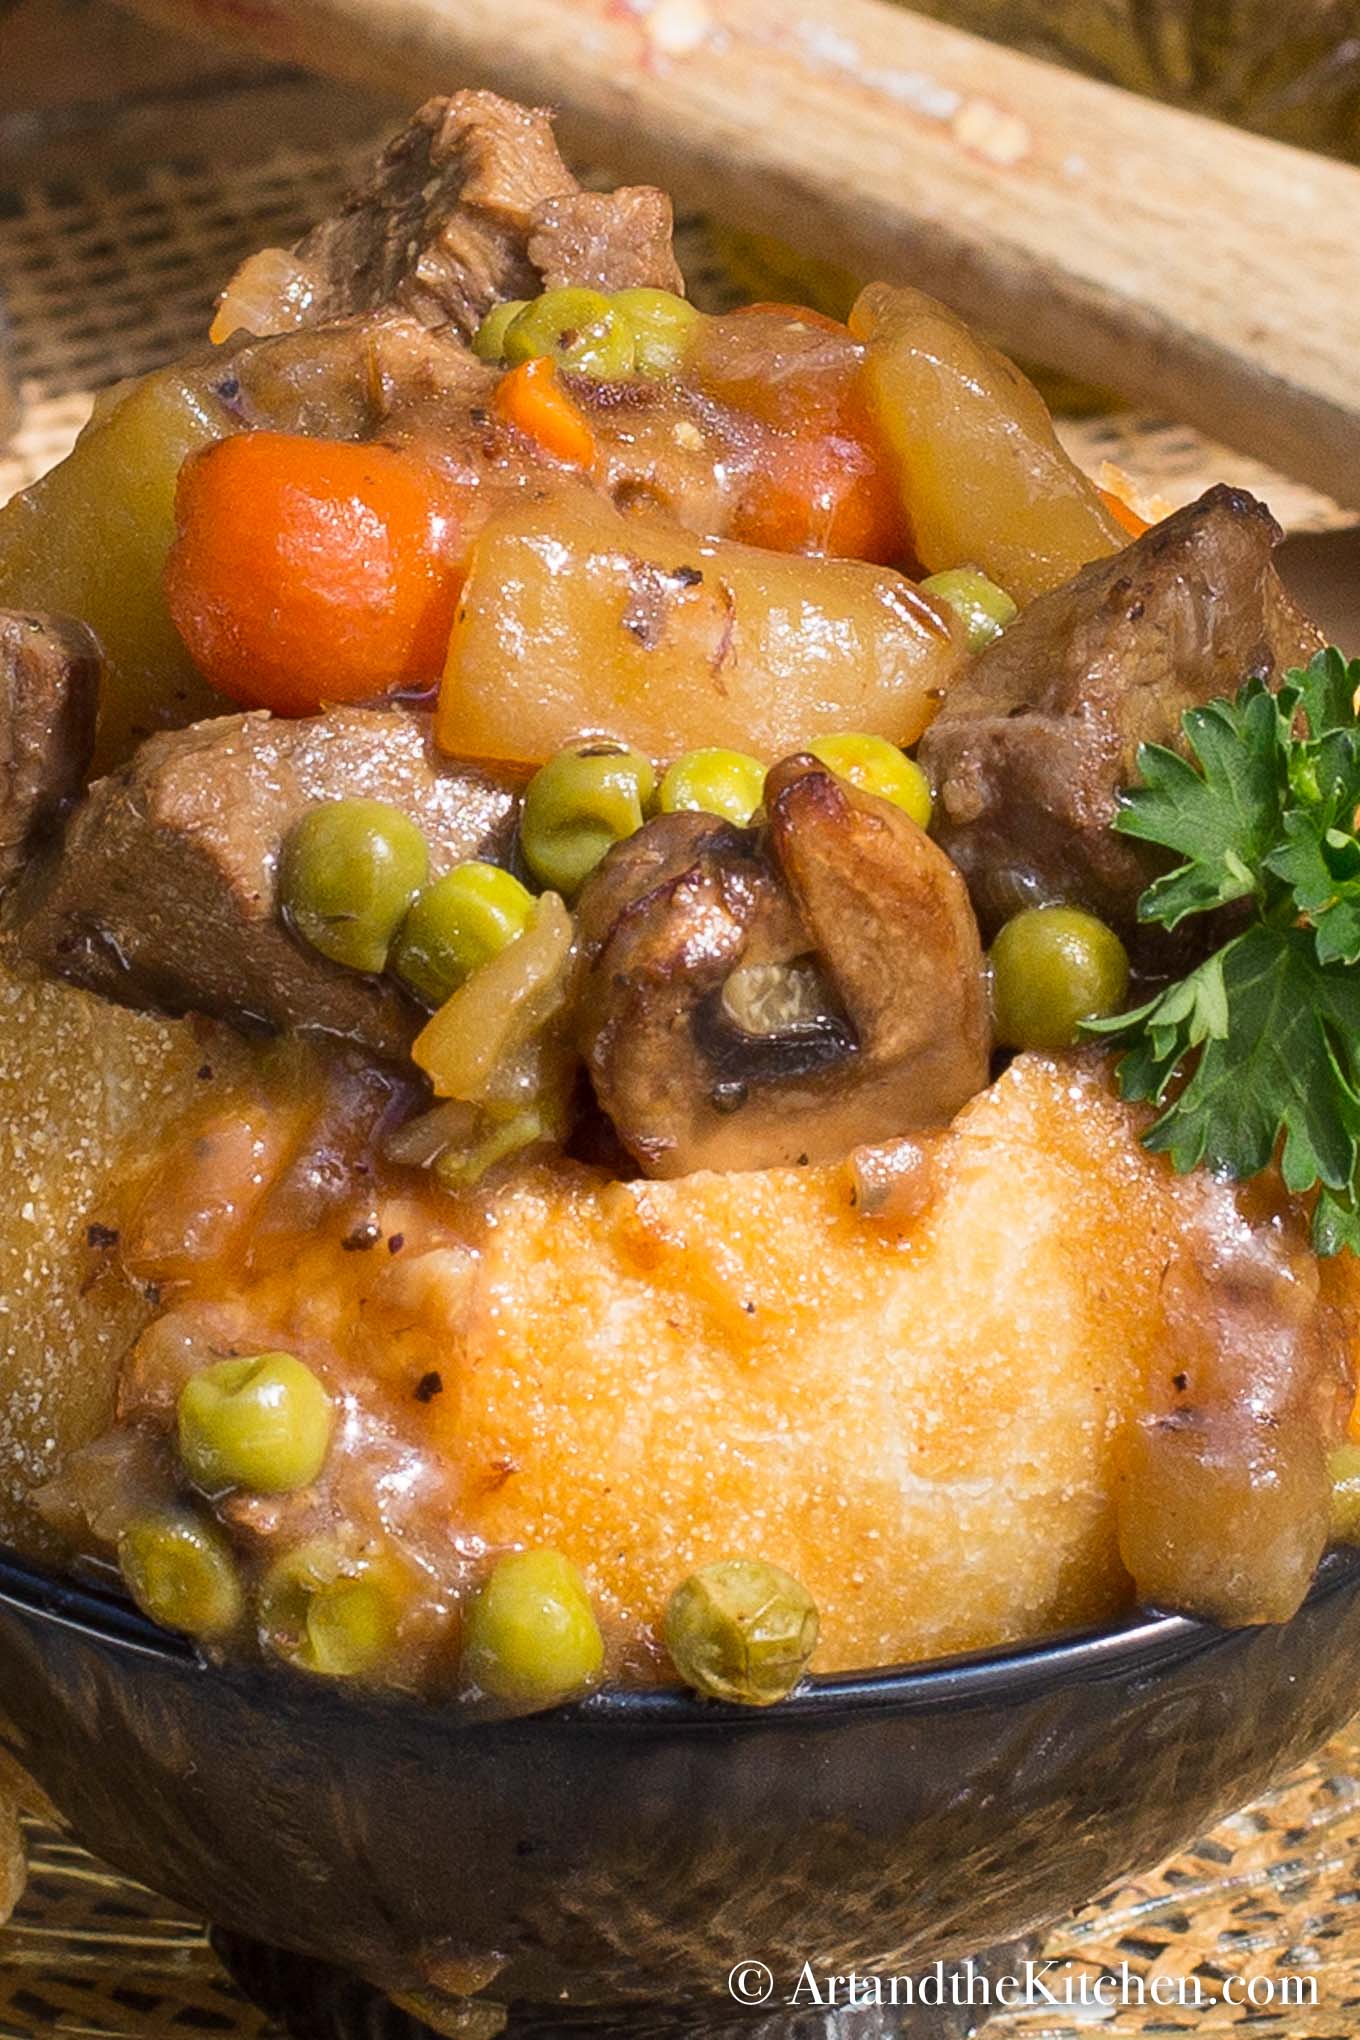 Beef stew in a bread bowl.